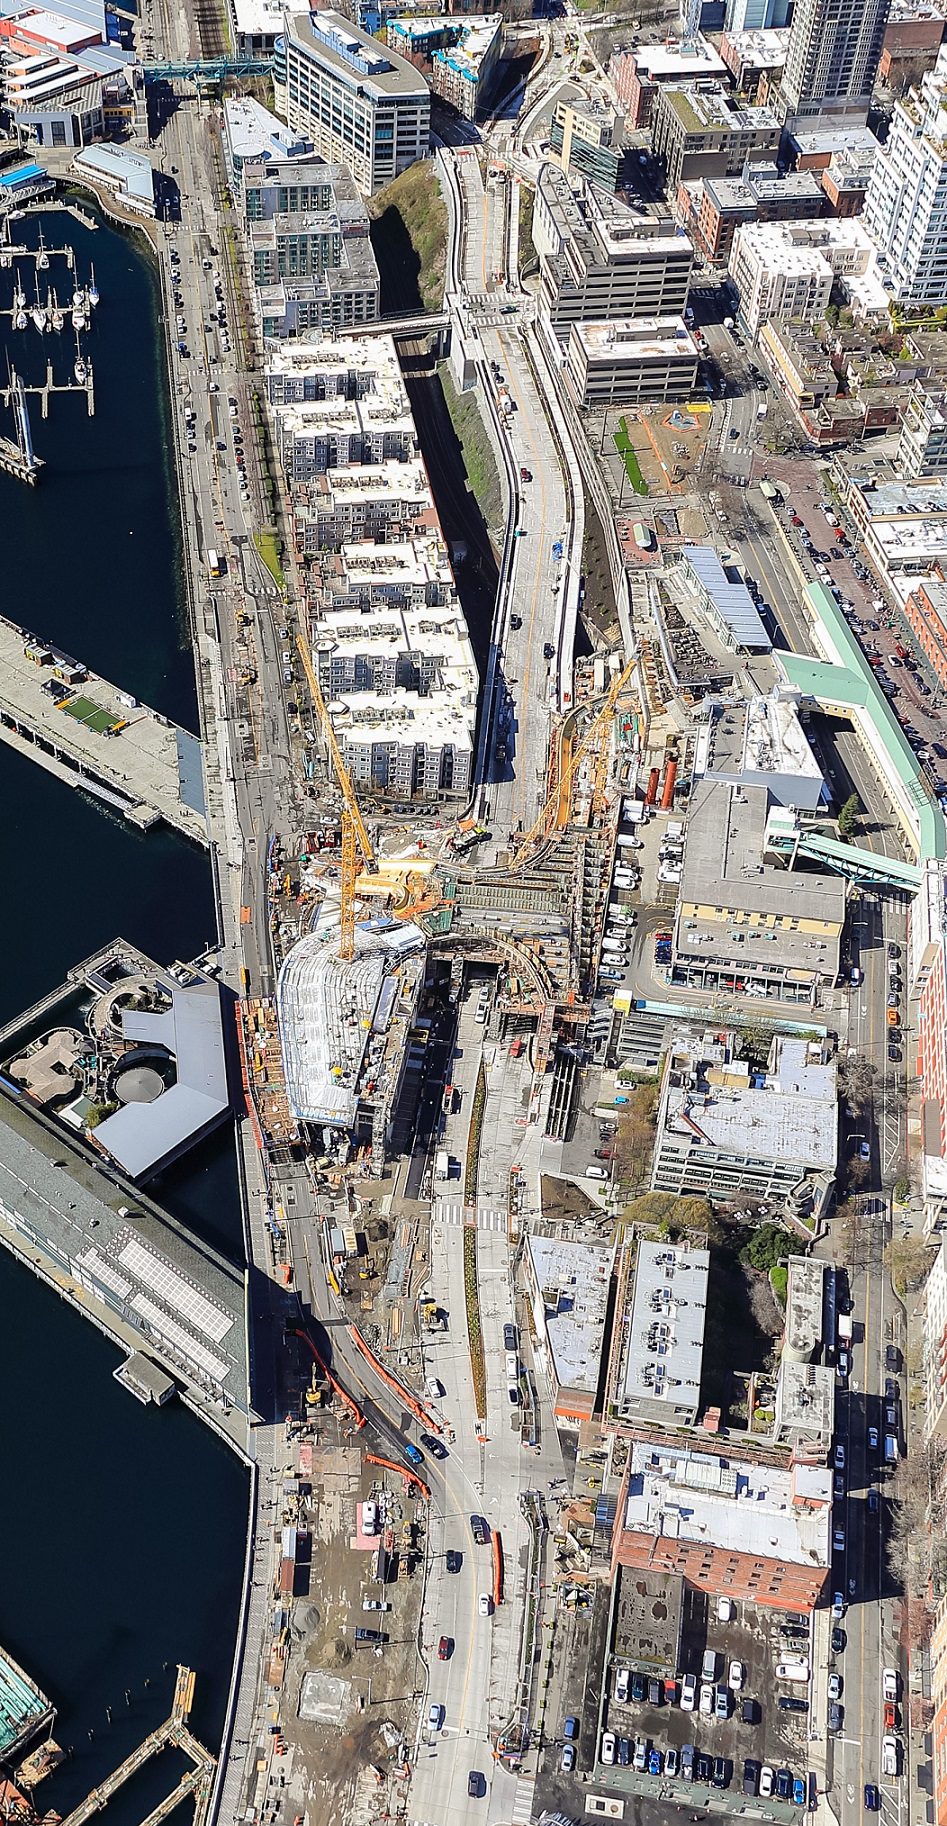 An aerial photo of a waterfront, streets, large buildings, construction cranes, and other cityscape elements.